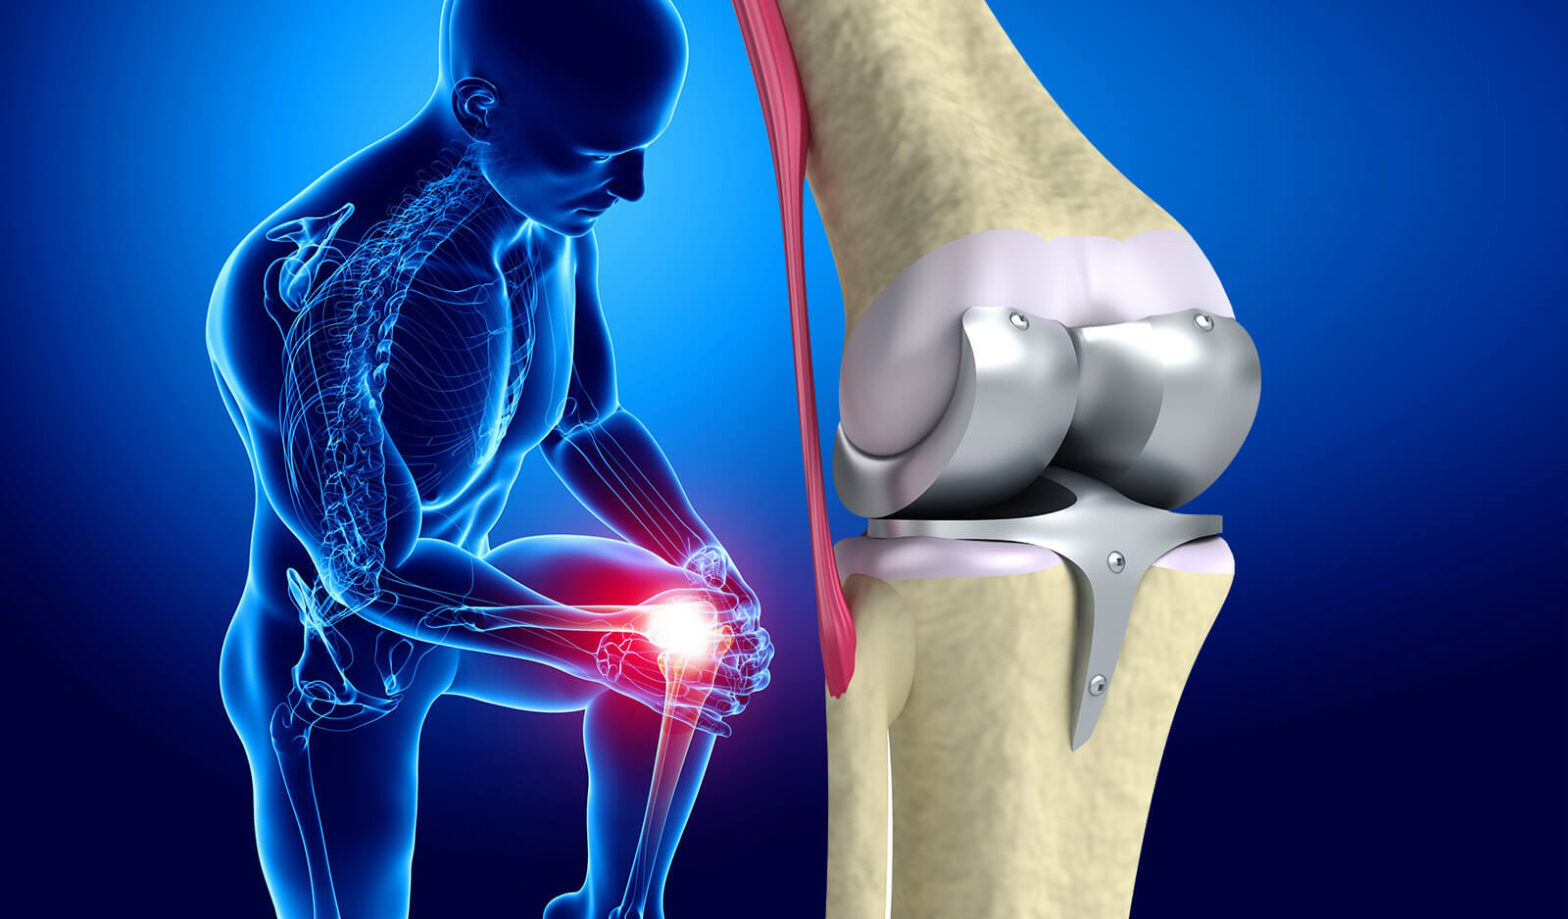 Global Revision Knee Replacement Industry